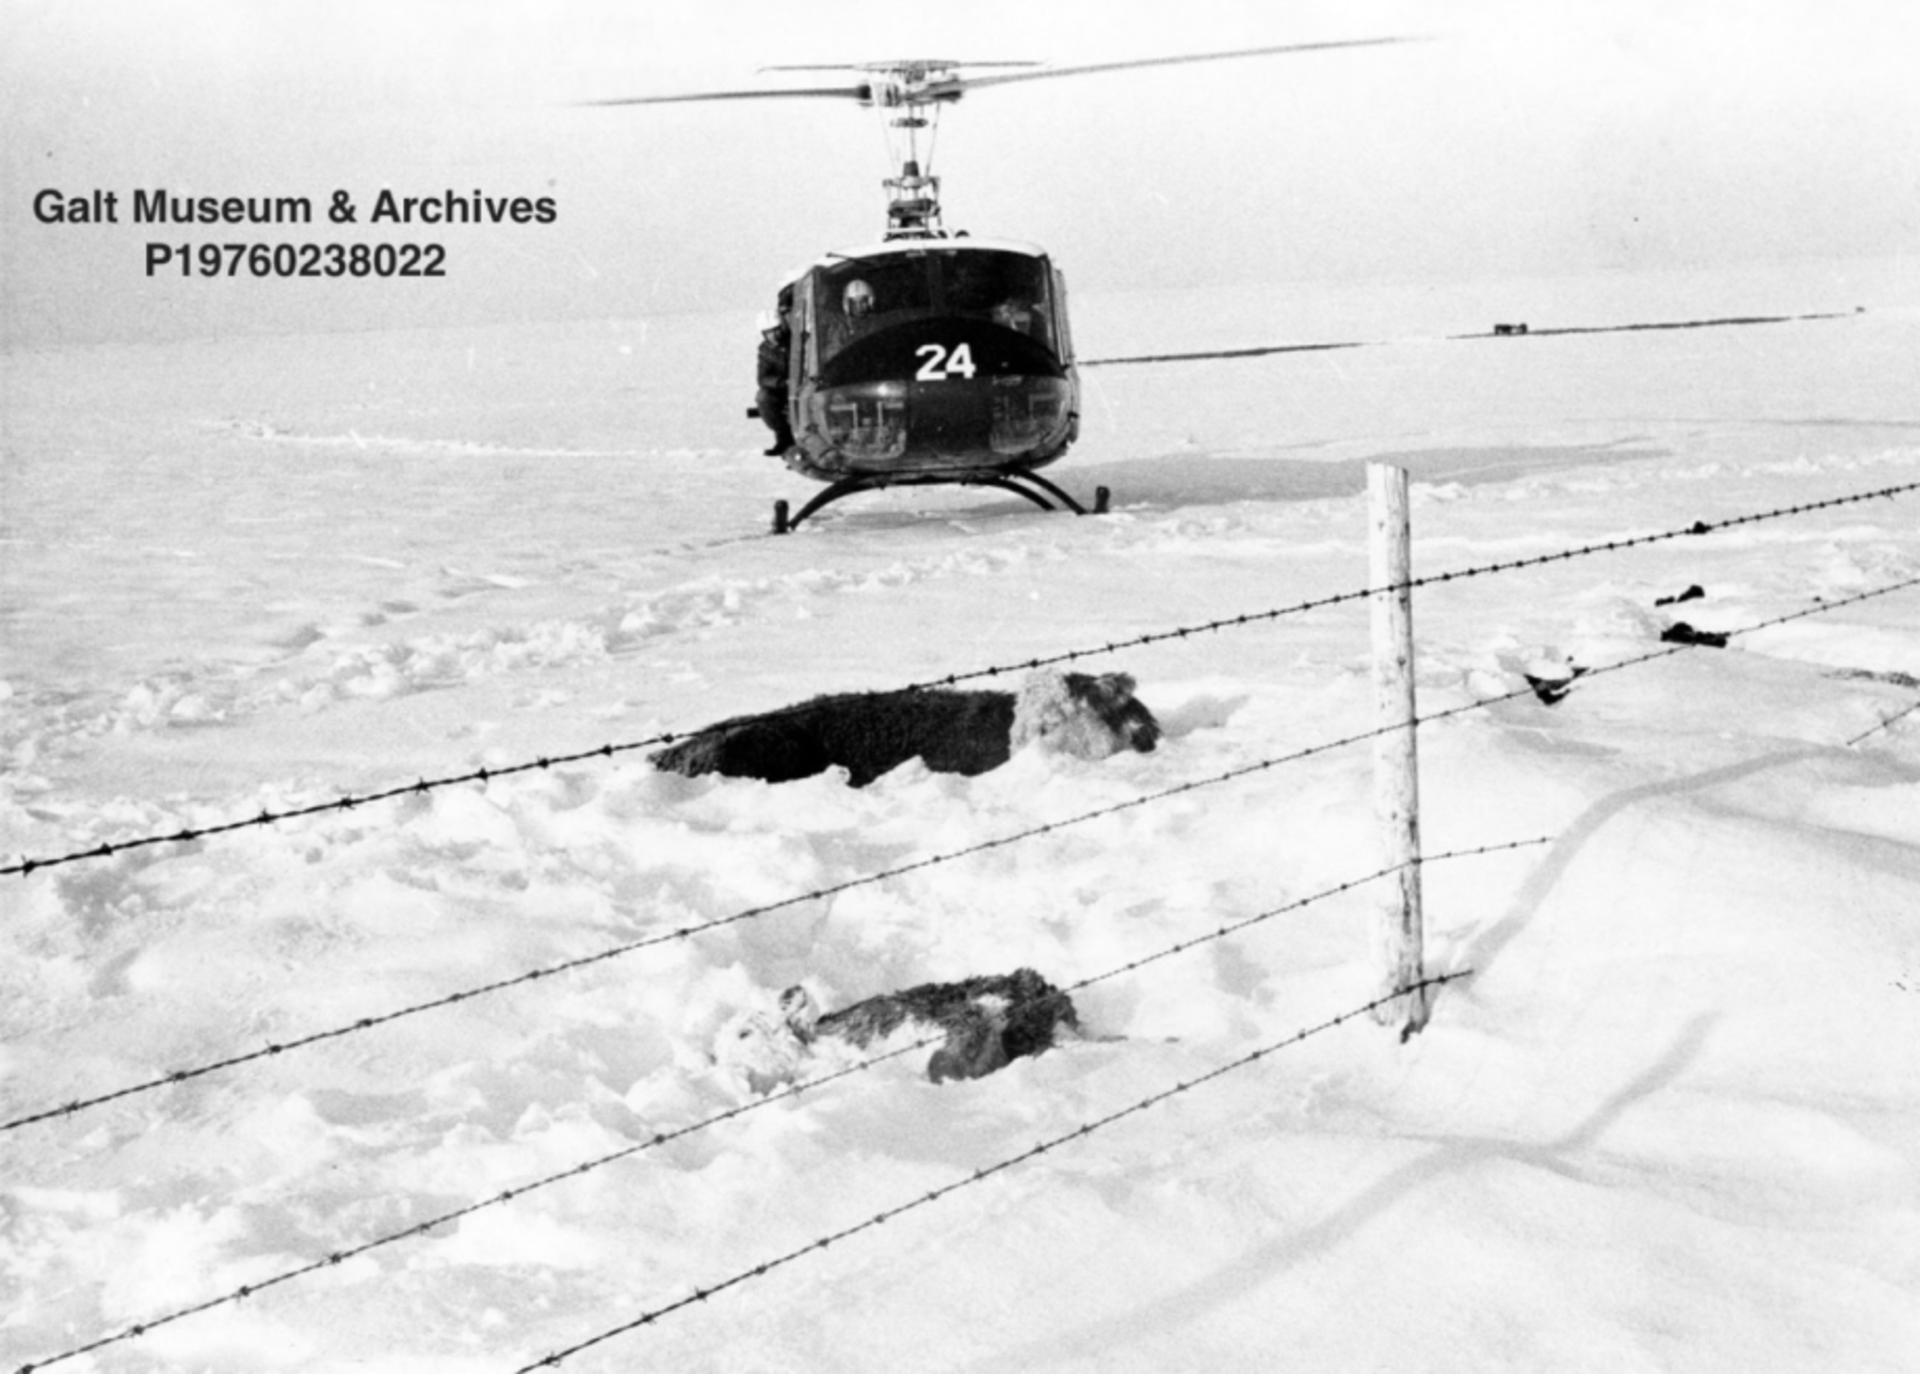 1967 snowstorm is still one of Canada's worst and it happened in April